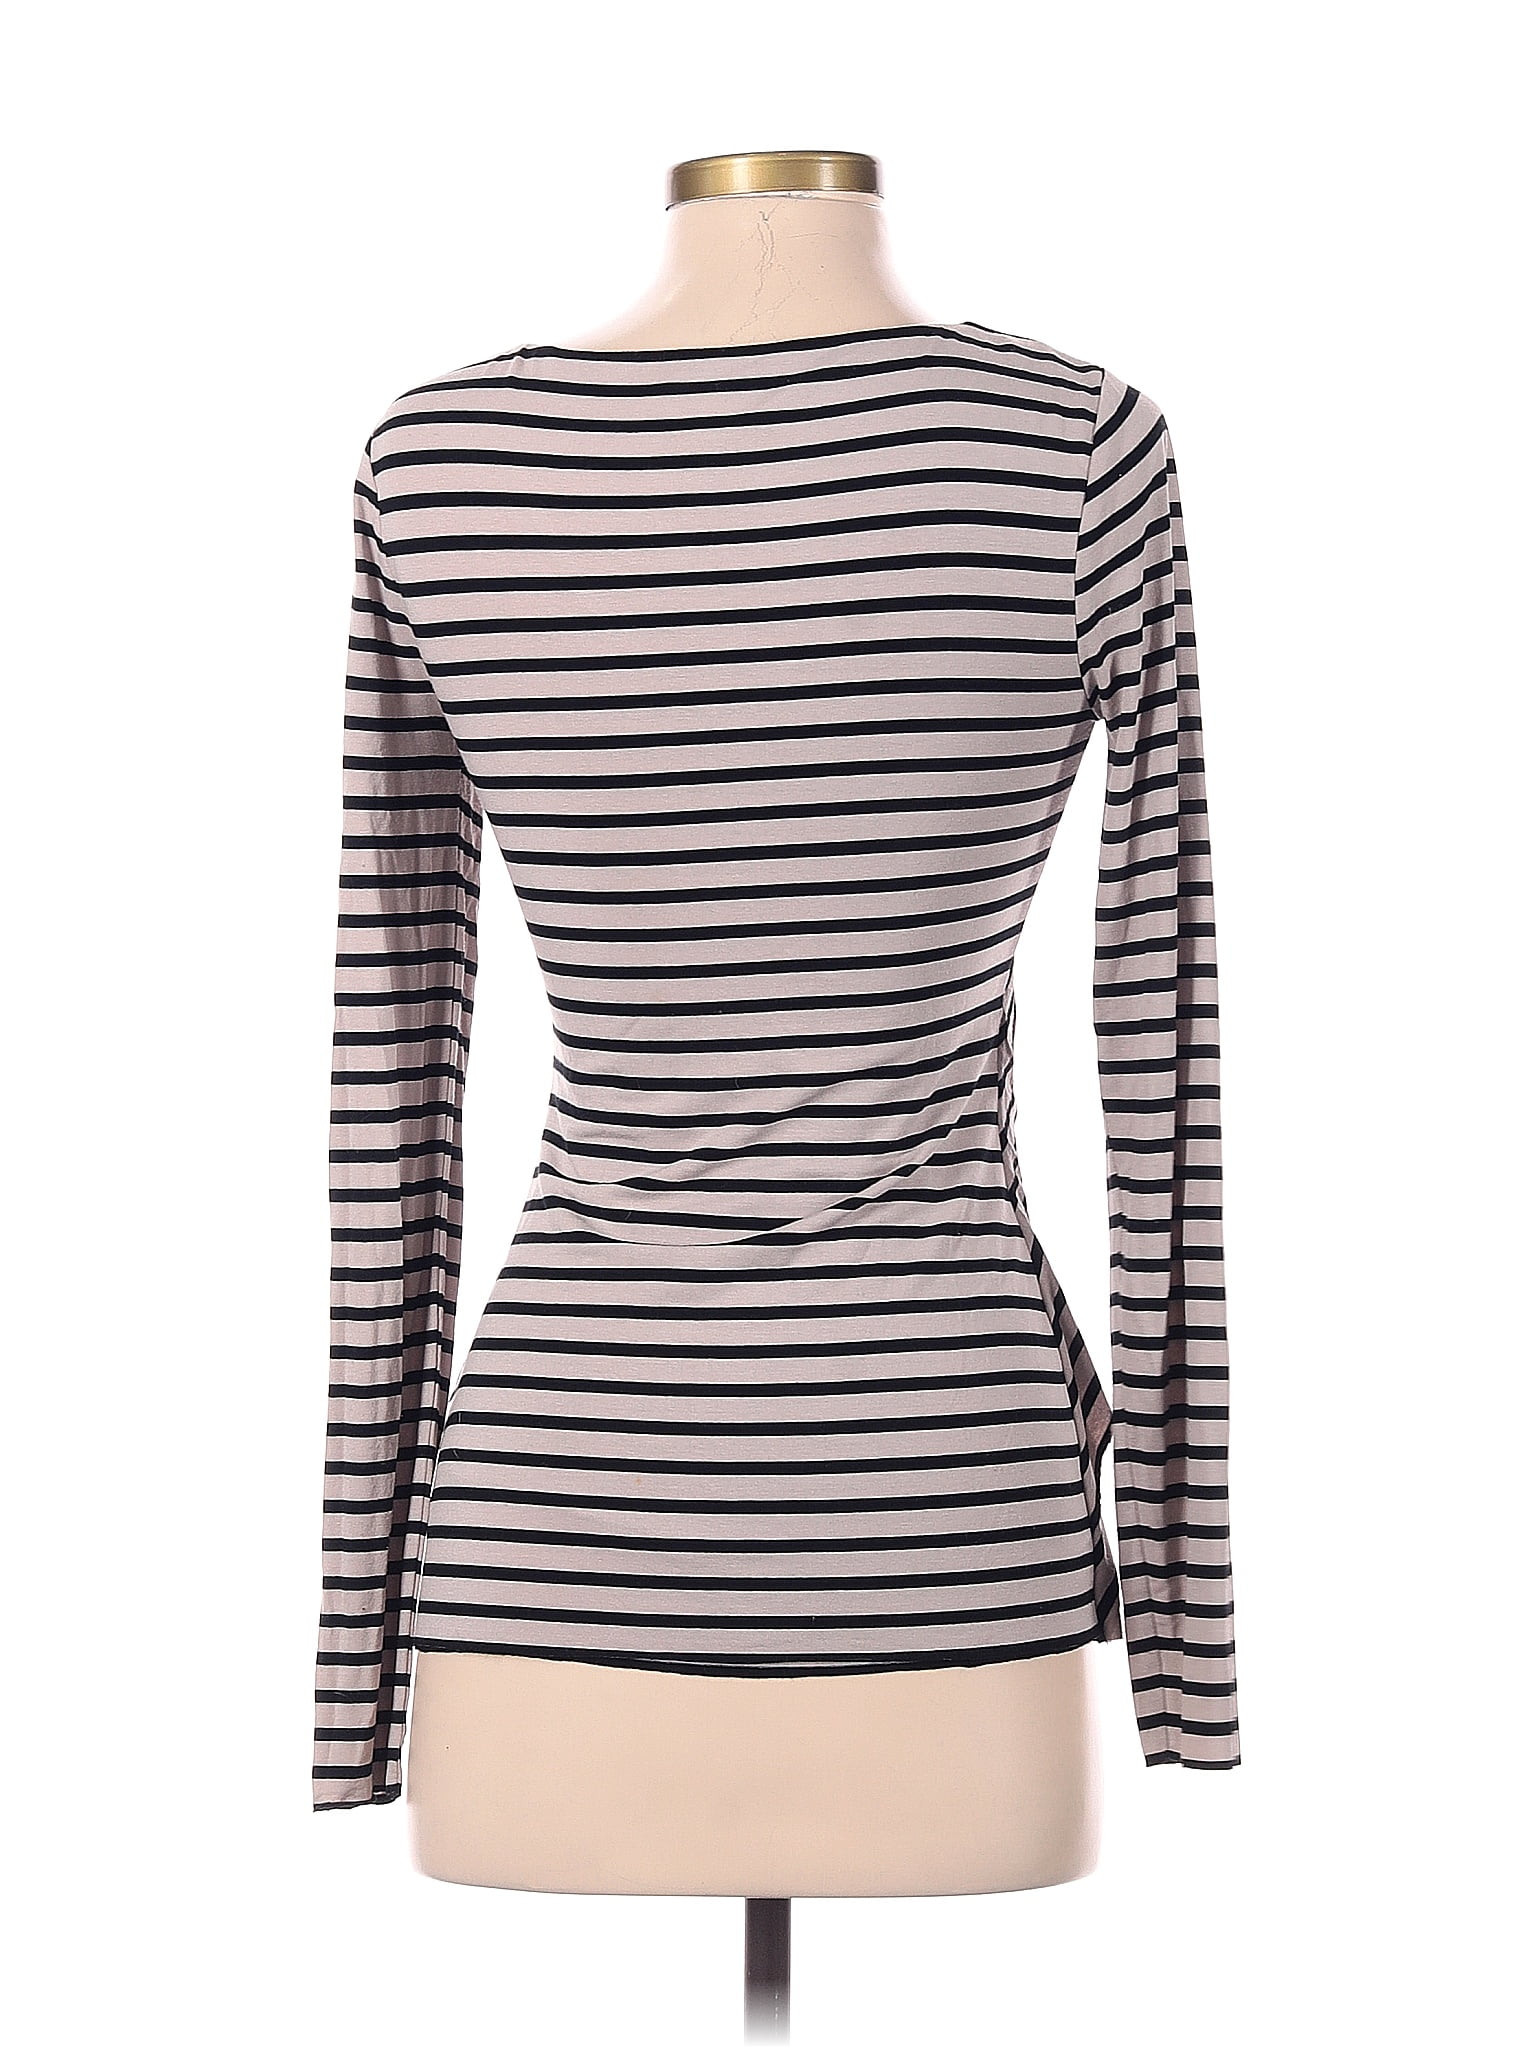 NEW Vince Camuto Black/White Colorblock Stripe Jersey top Larger MSRP 79.00